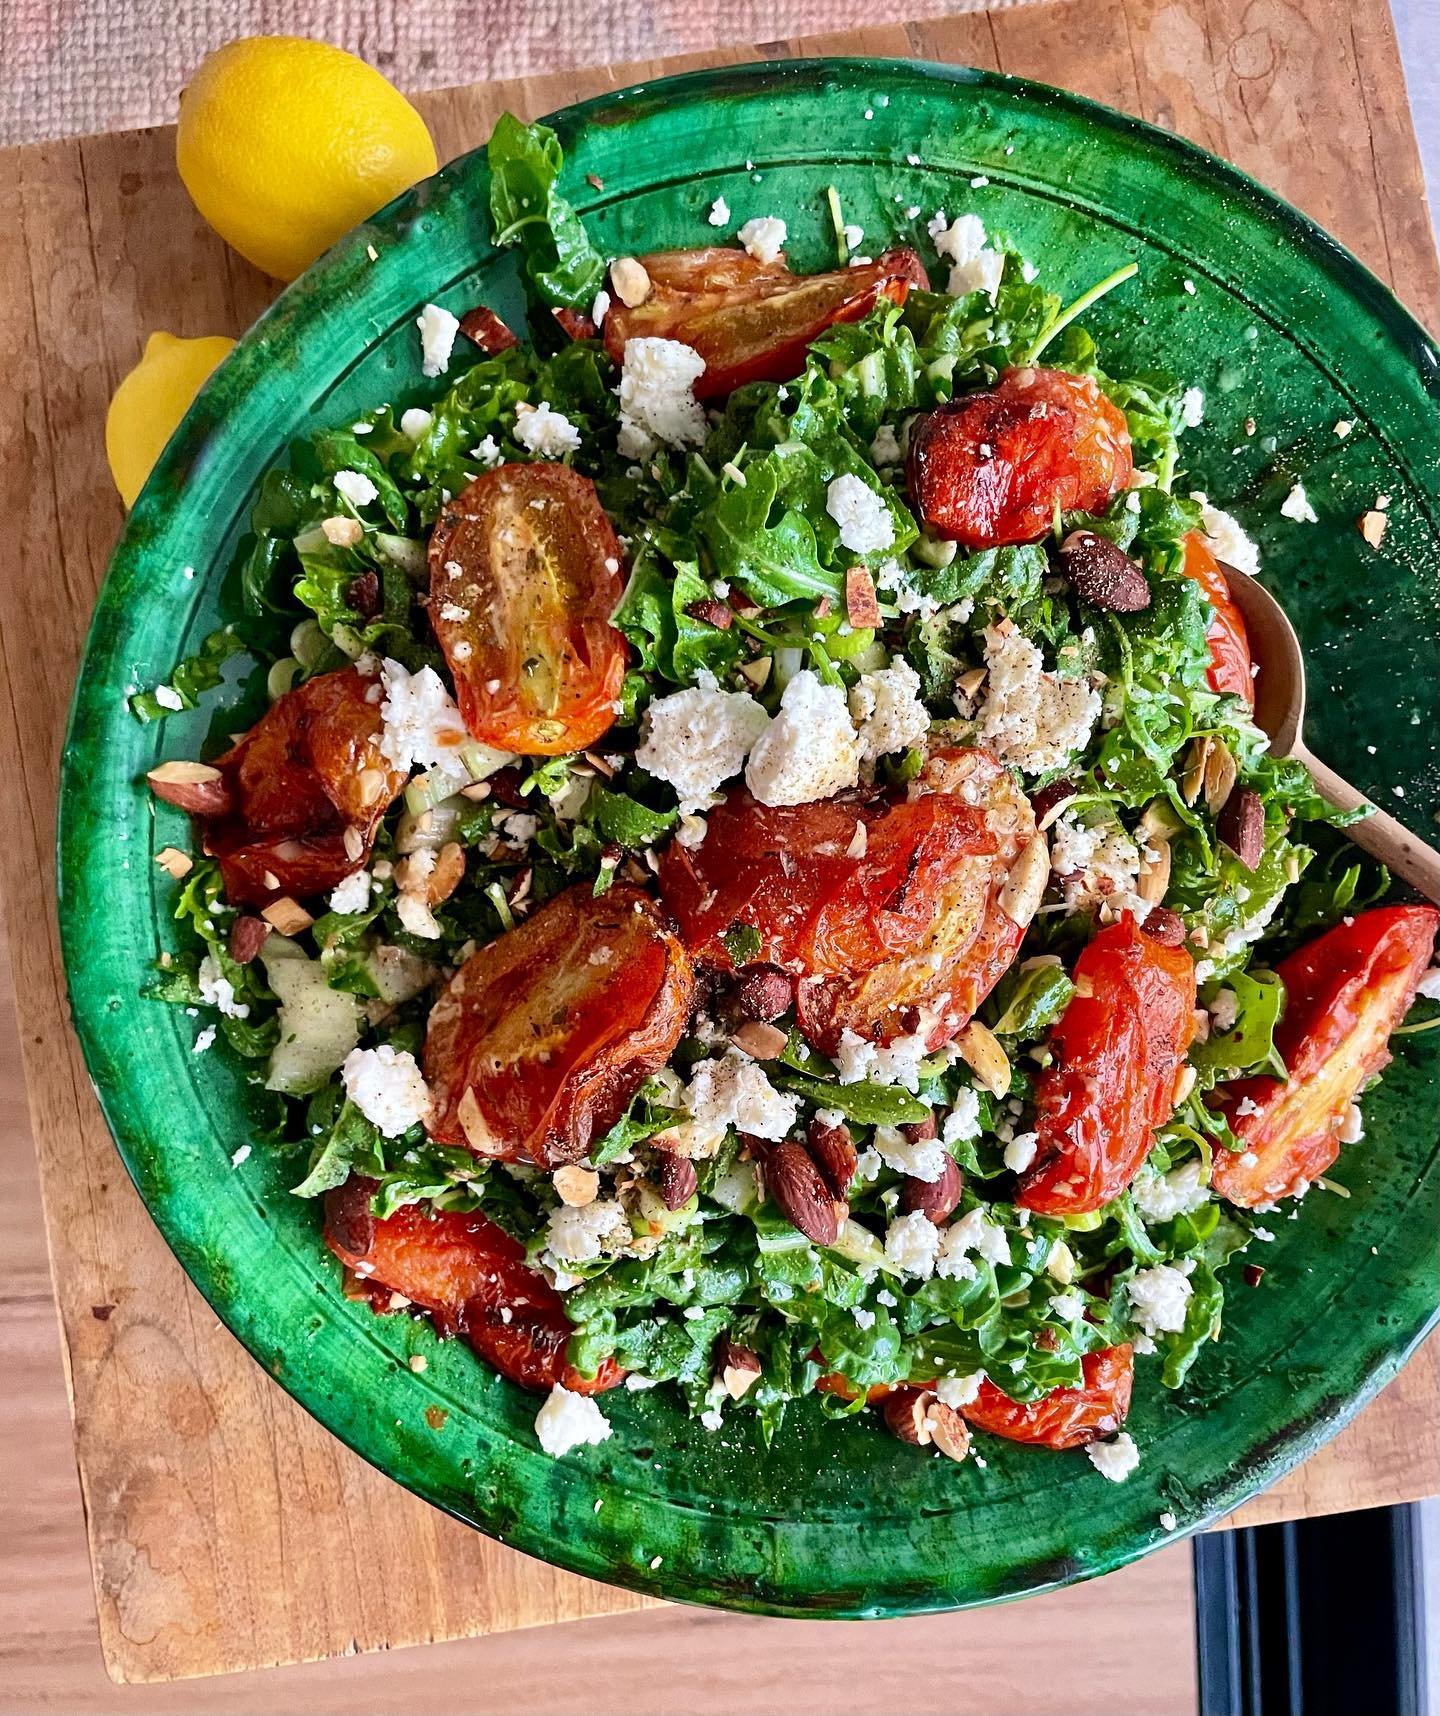 Silverbeet salad with feta, crushed almonds and roast tomatoes. Lots of garlic, mint and spring onion in the mix as well!